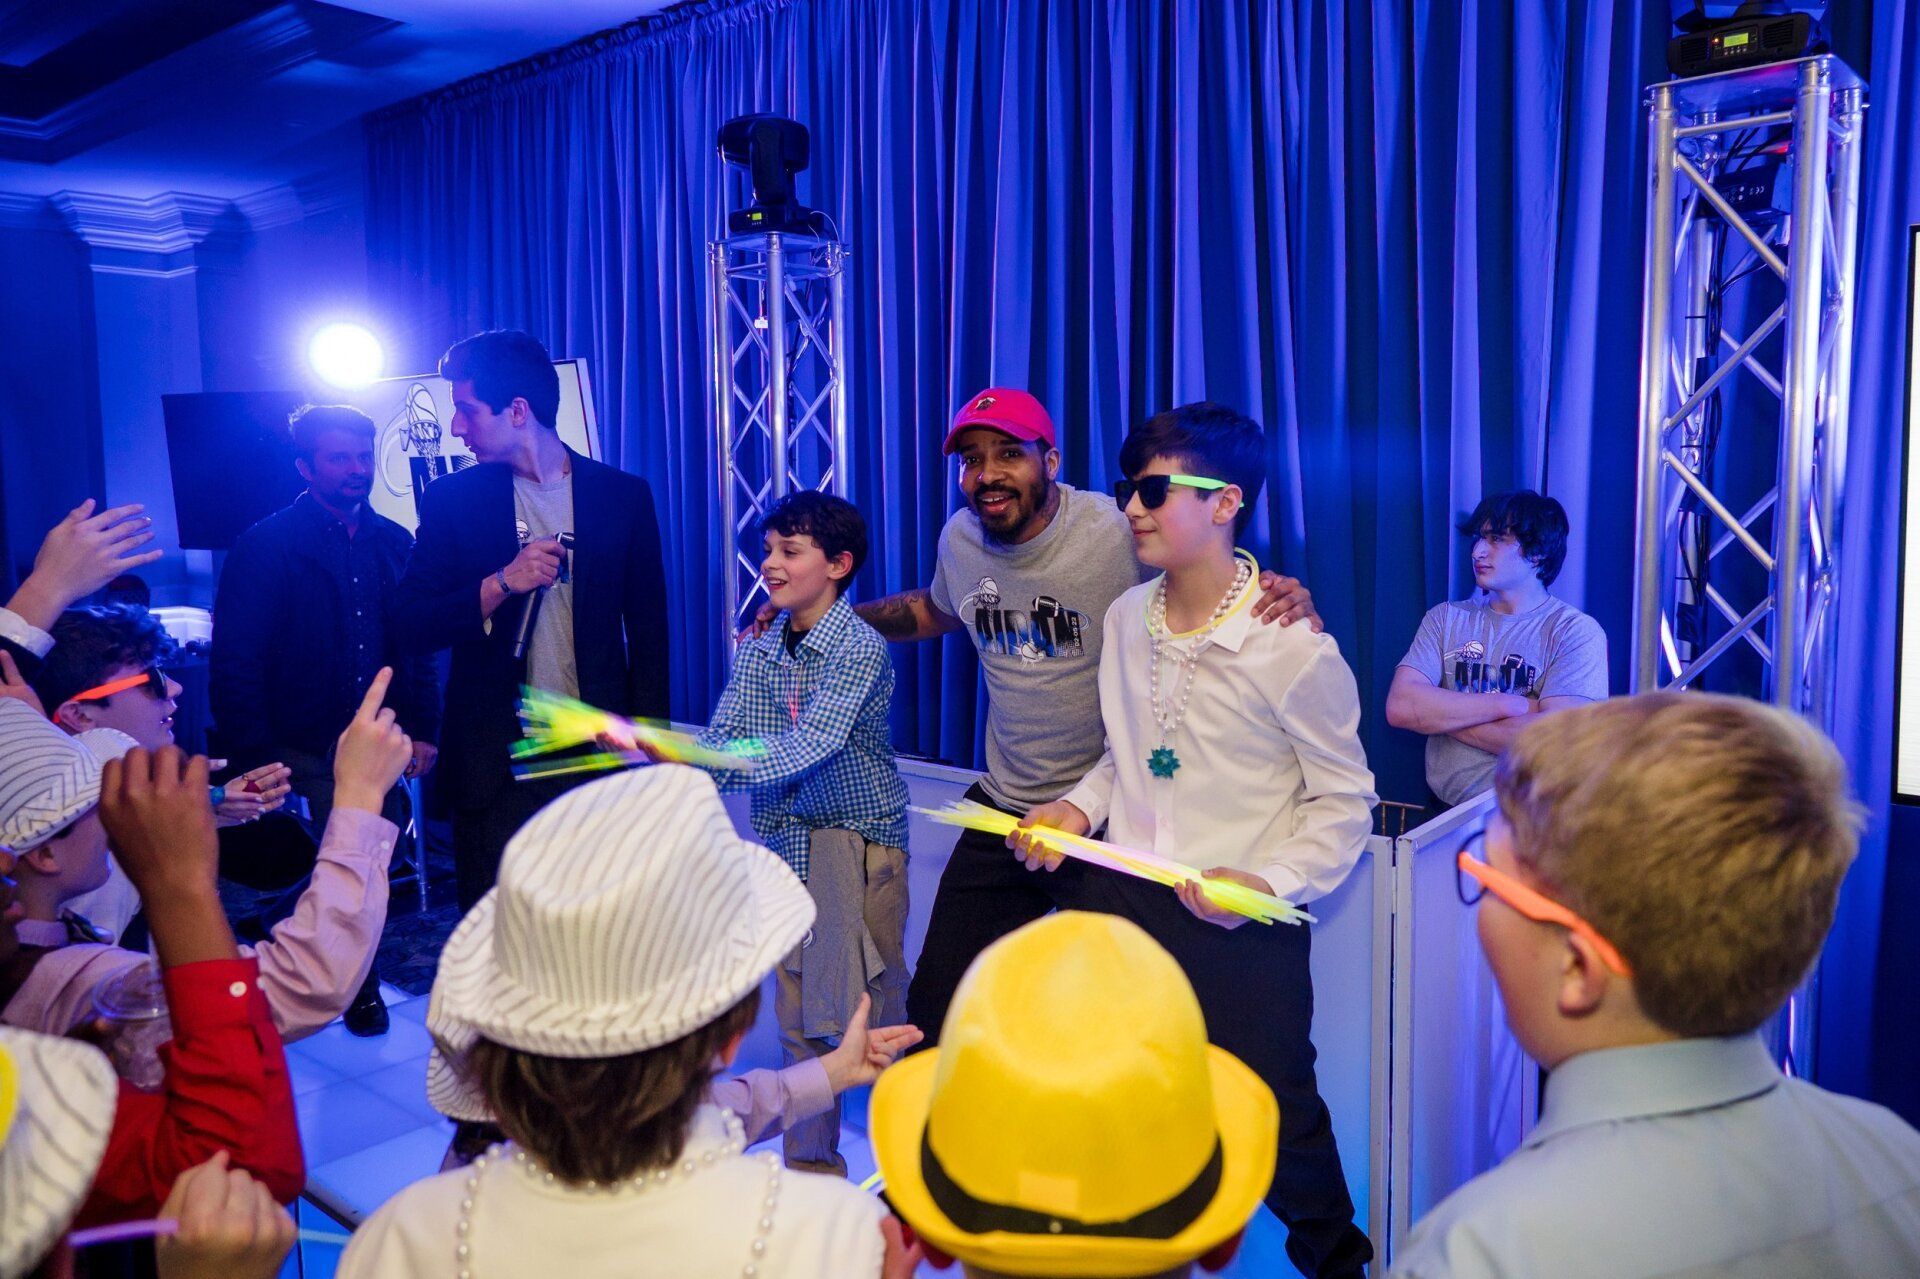 Bar mitzvah event with multiple guests dancing.